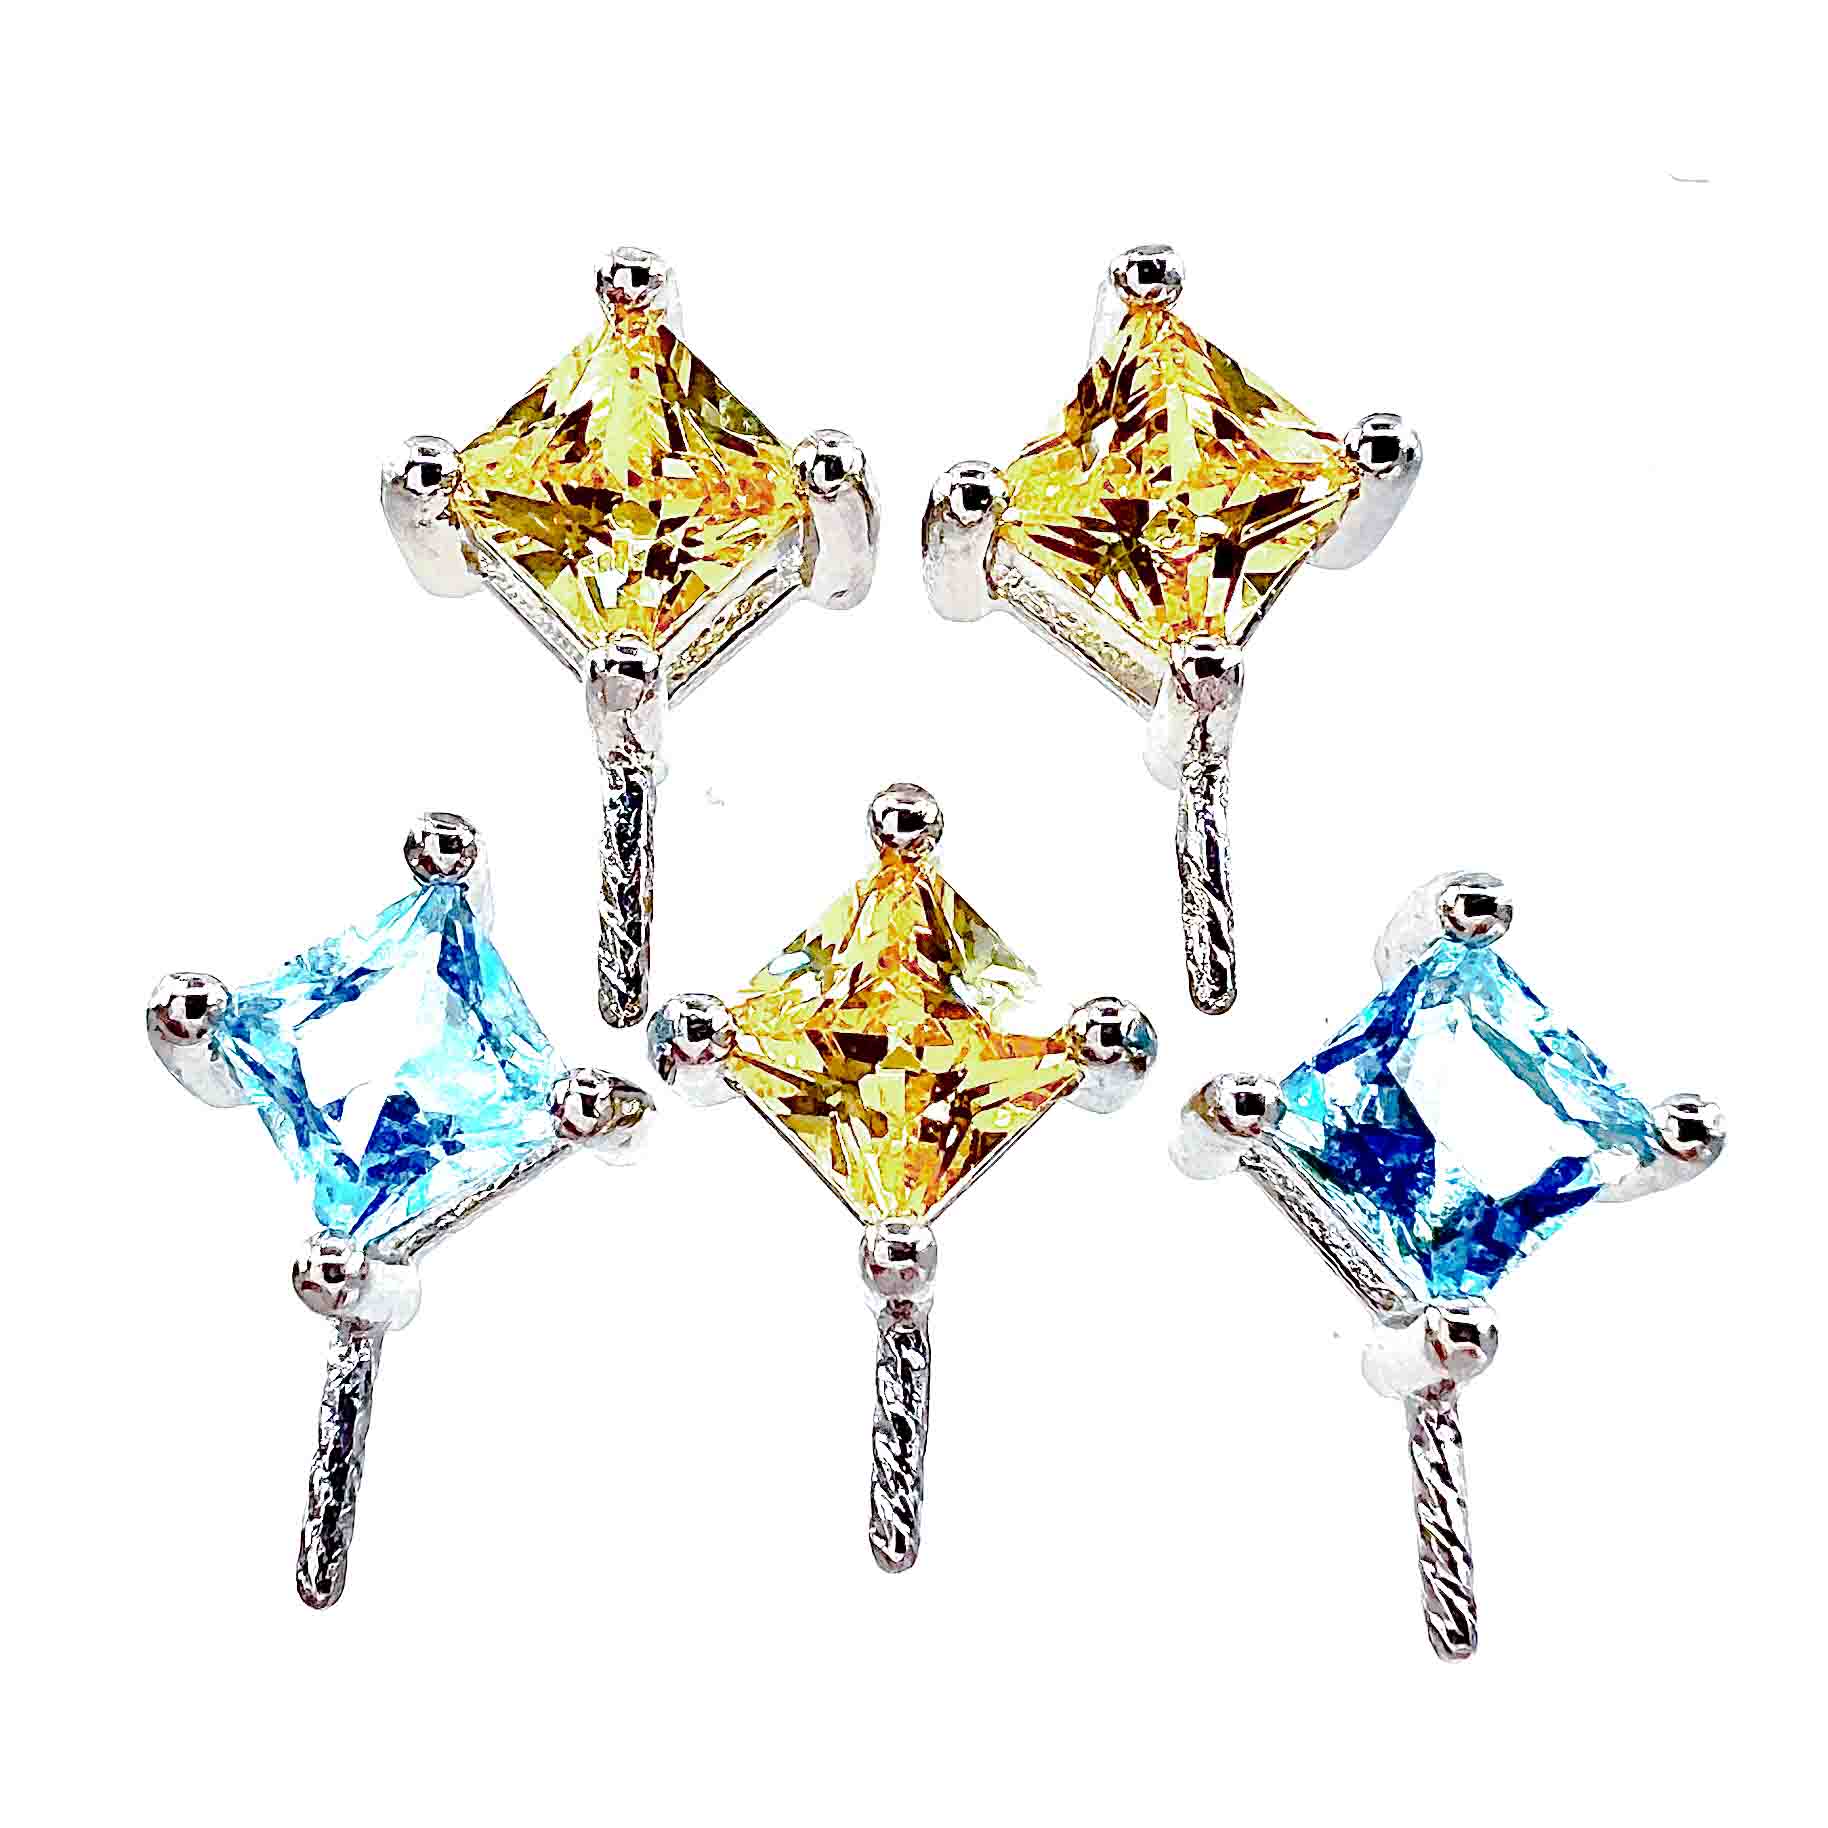 DIY Mount Pendant - 925 Sterling Silver Yellow and Blue Rhinestones (5 Pack)